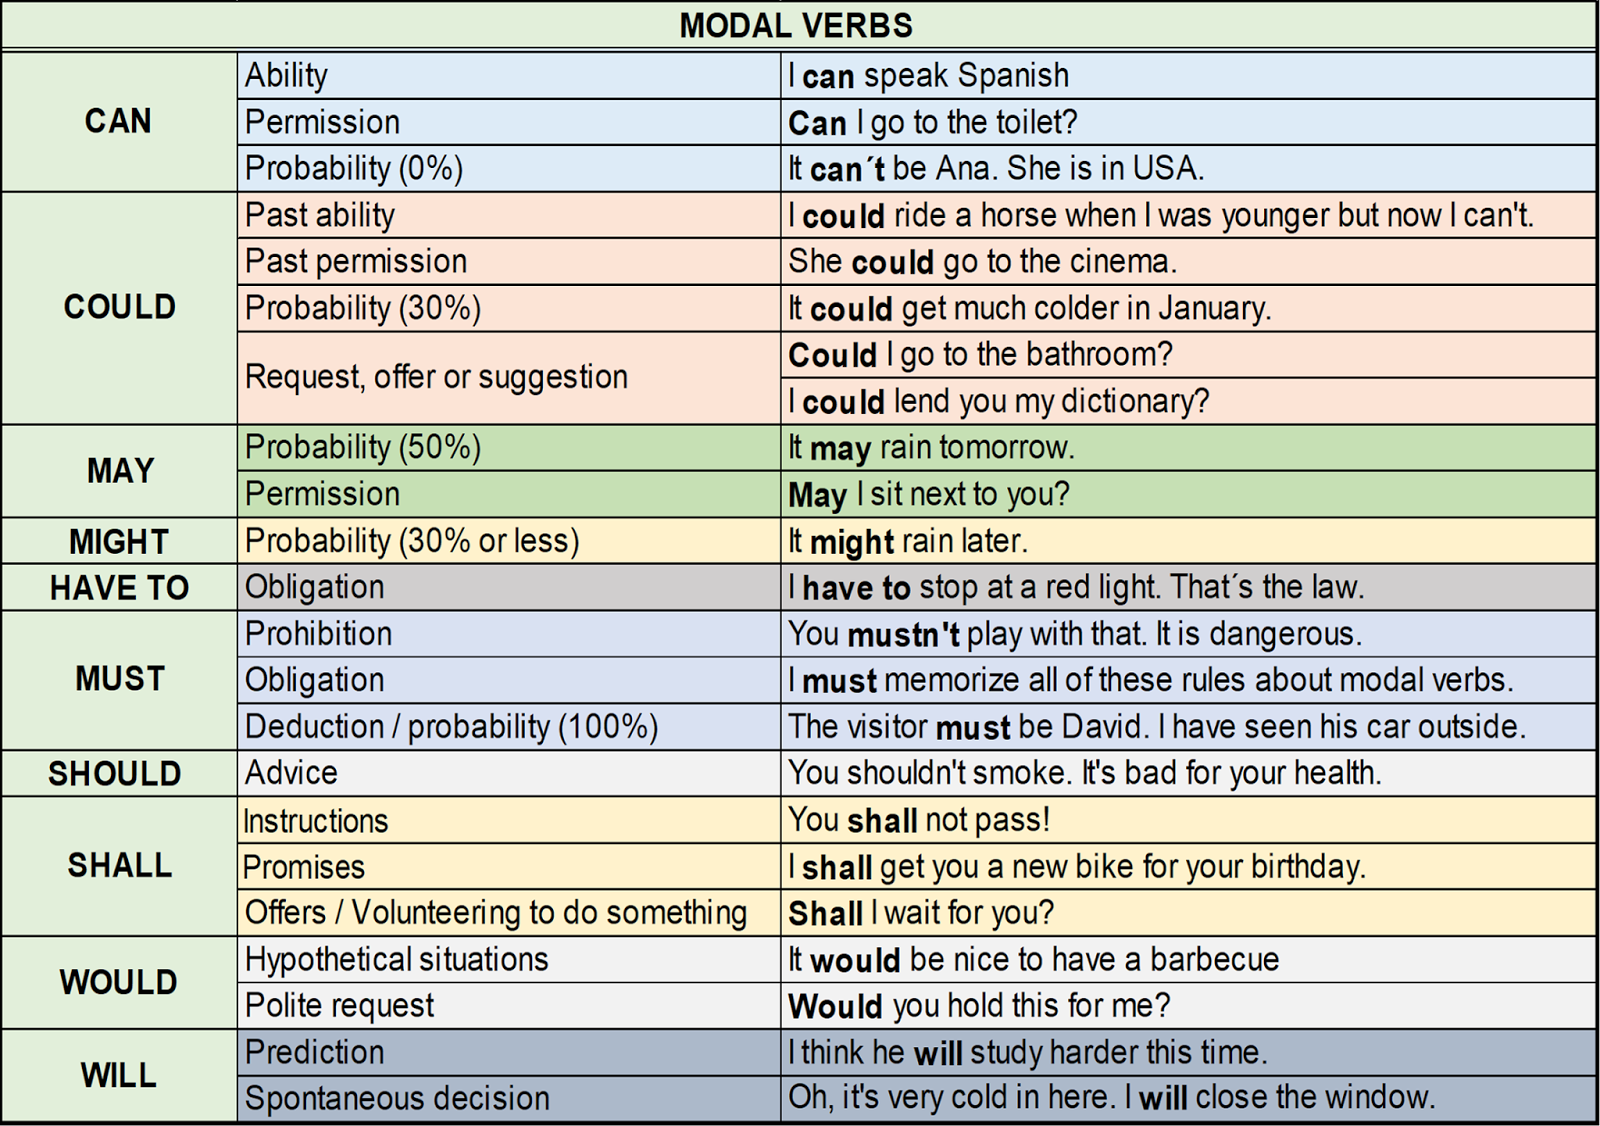 To have much to offer. Modal verbs can May must. Can May must правило. Shall will Модальные глаголы. Ability modal verbs.